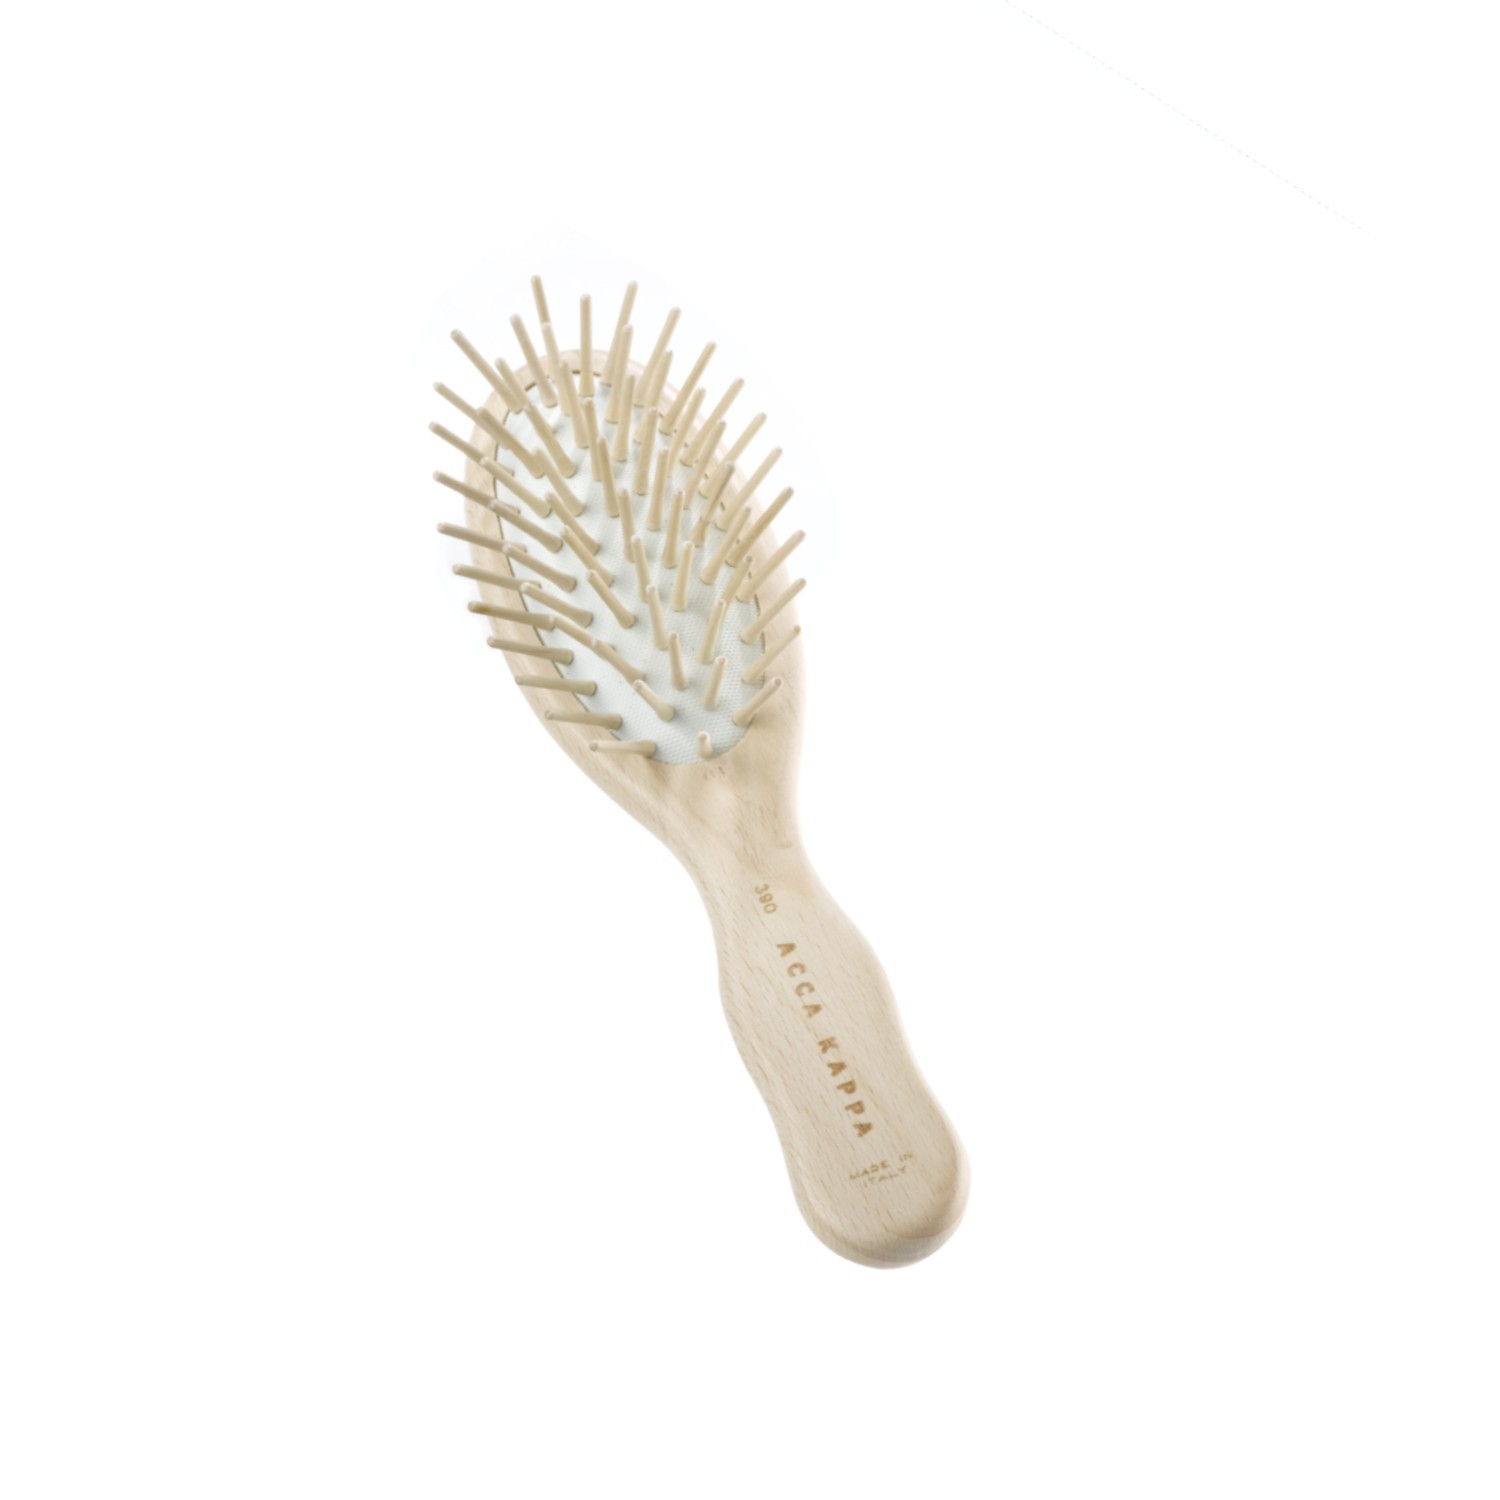 ACCA KAPPA Beech Wood Pneumatic Travel Brush with Wooden Pins